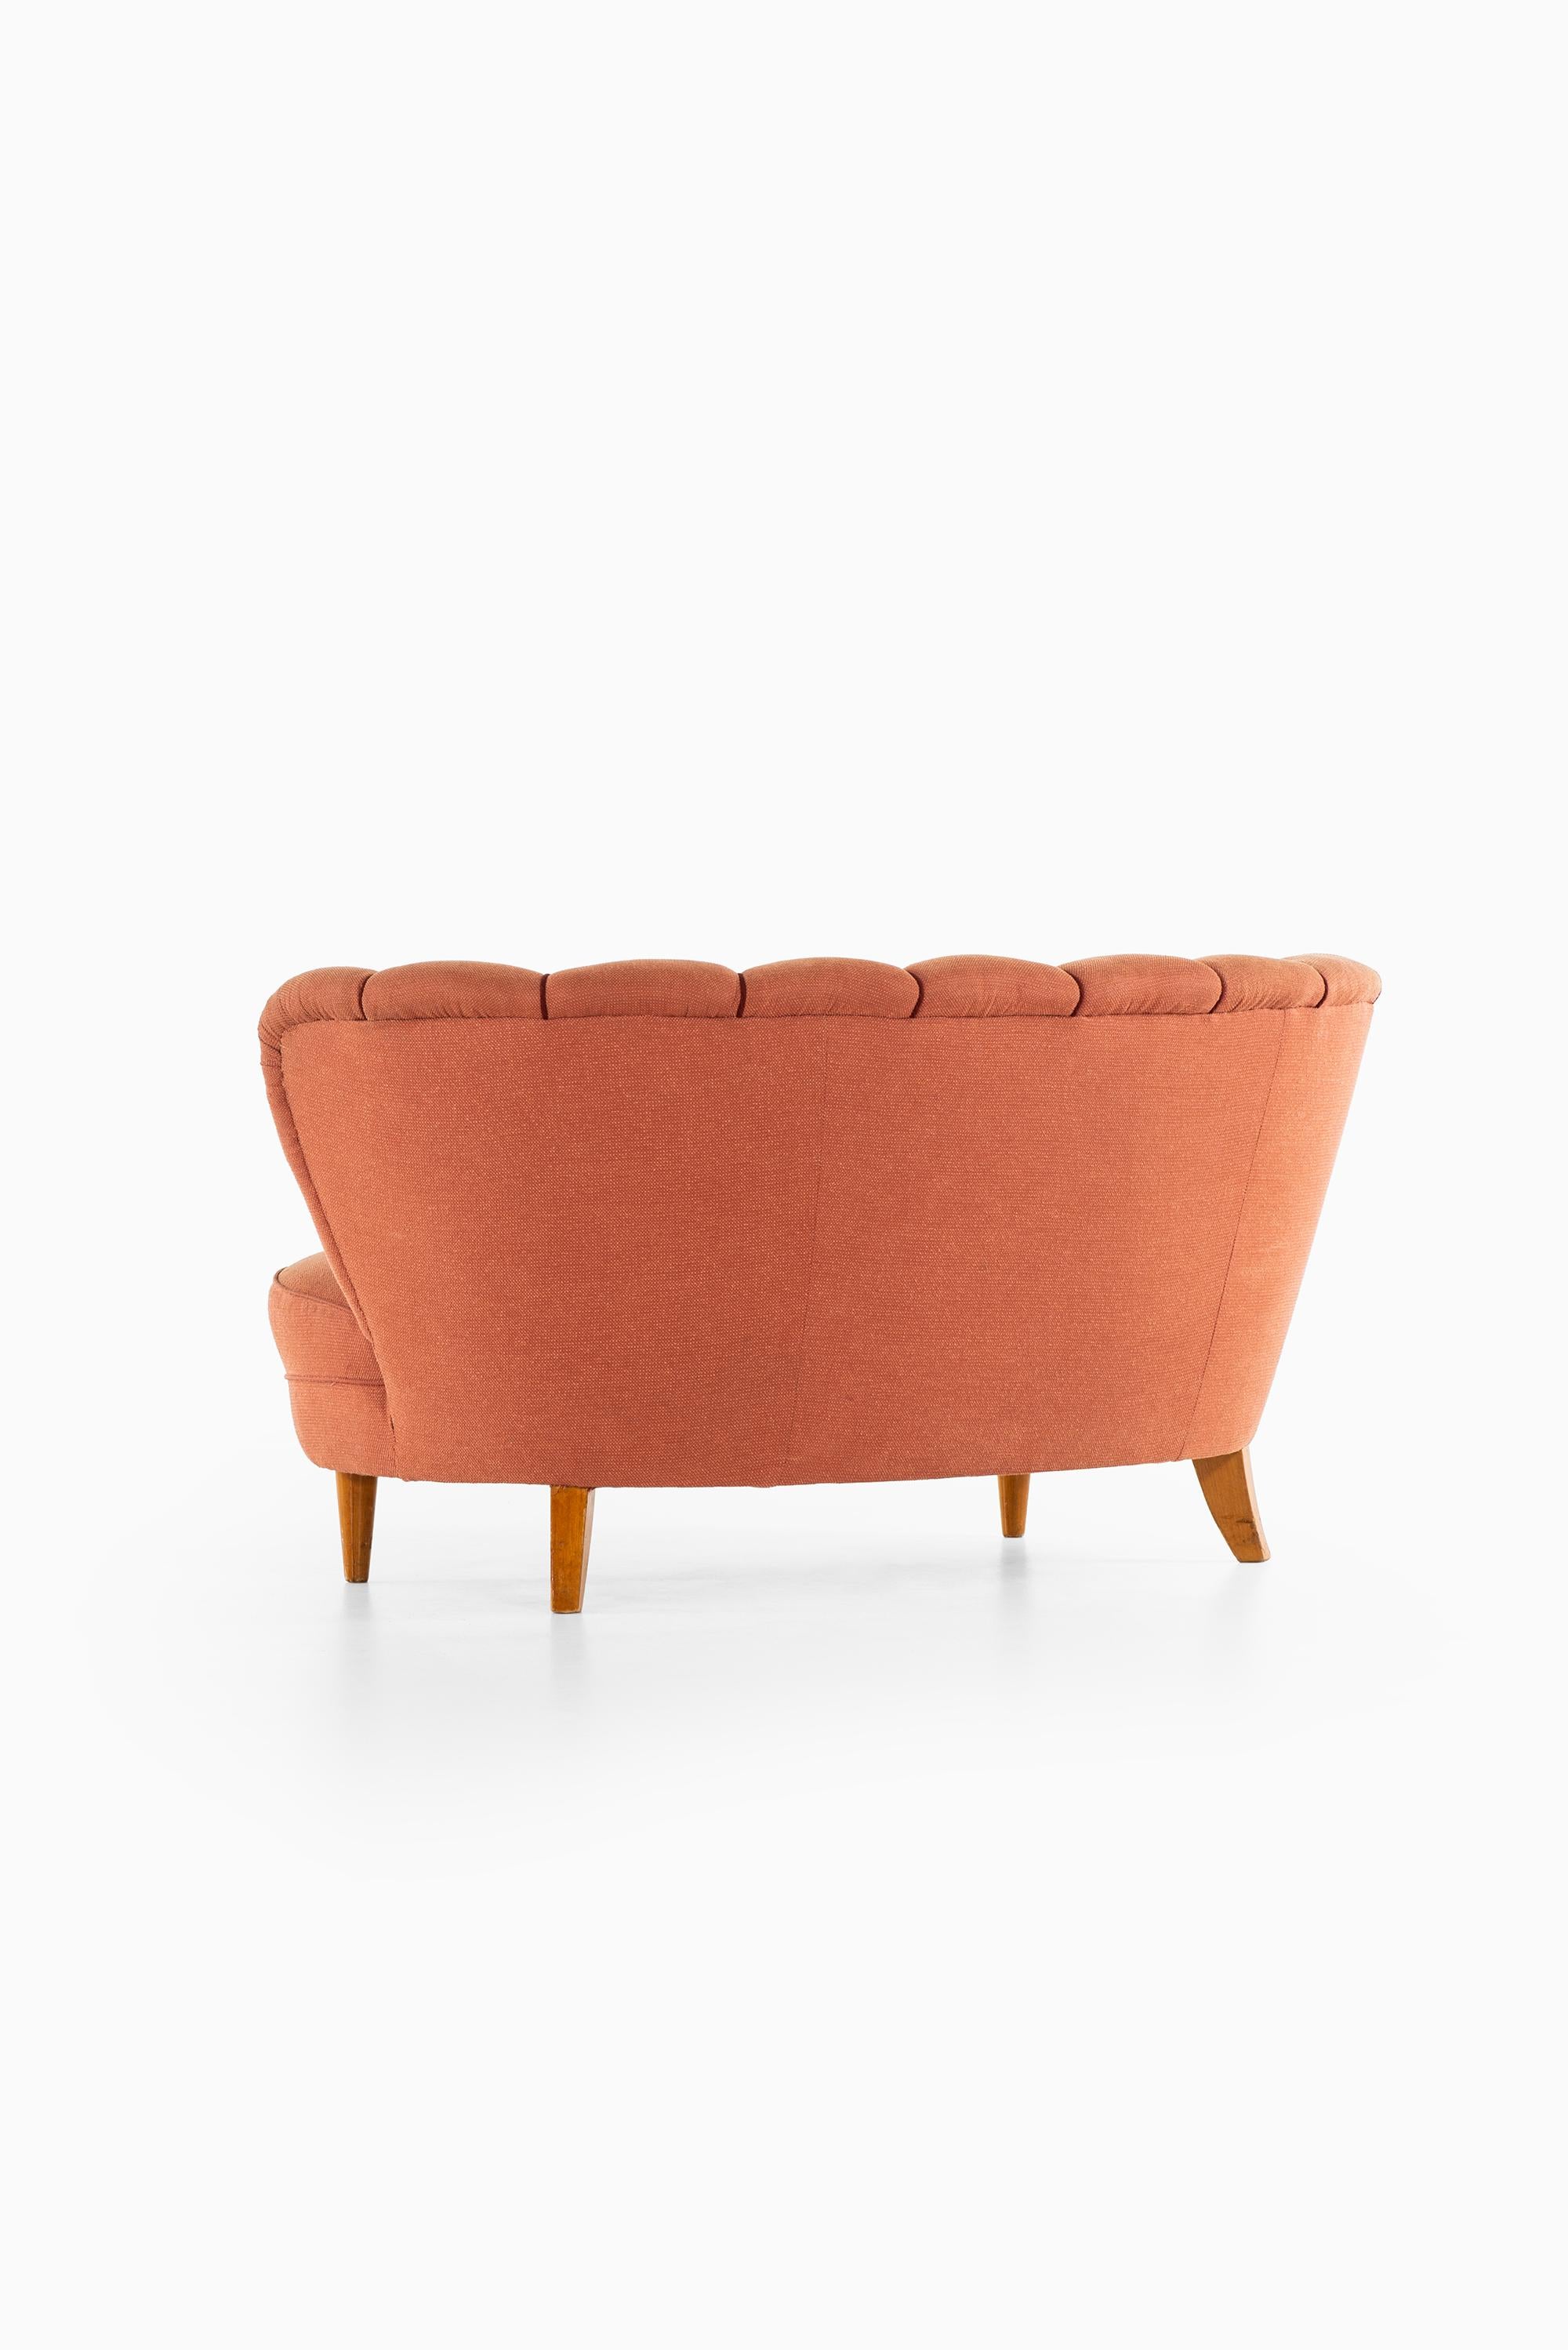 Swedish Seating Group in the Manner of Otto Schulz Produced in Sweden